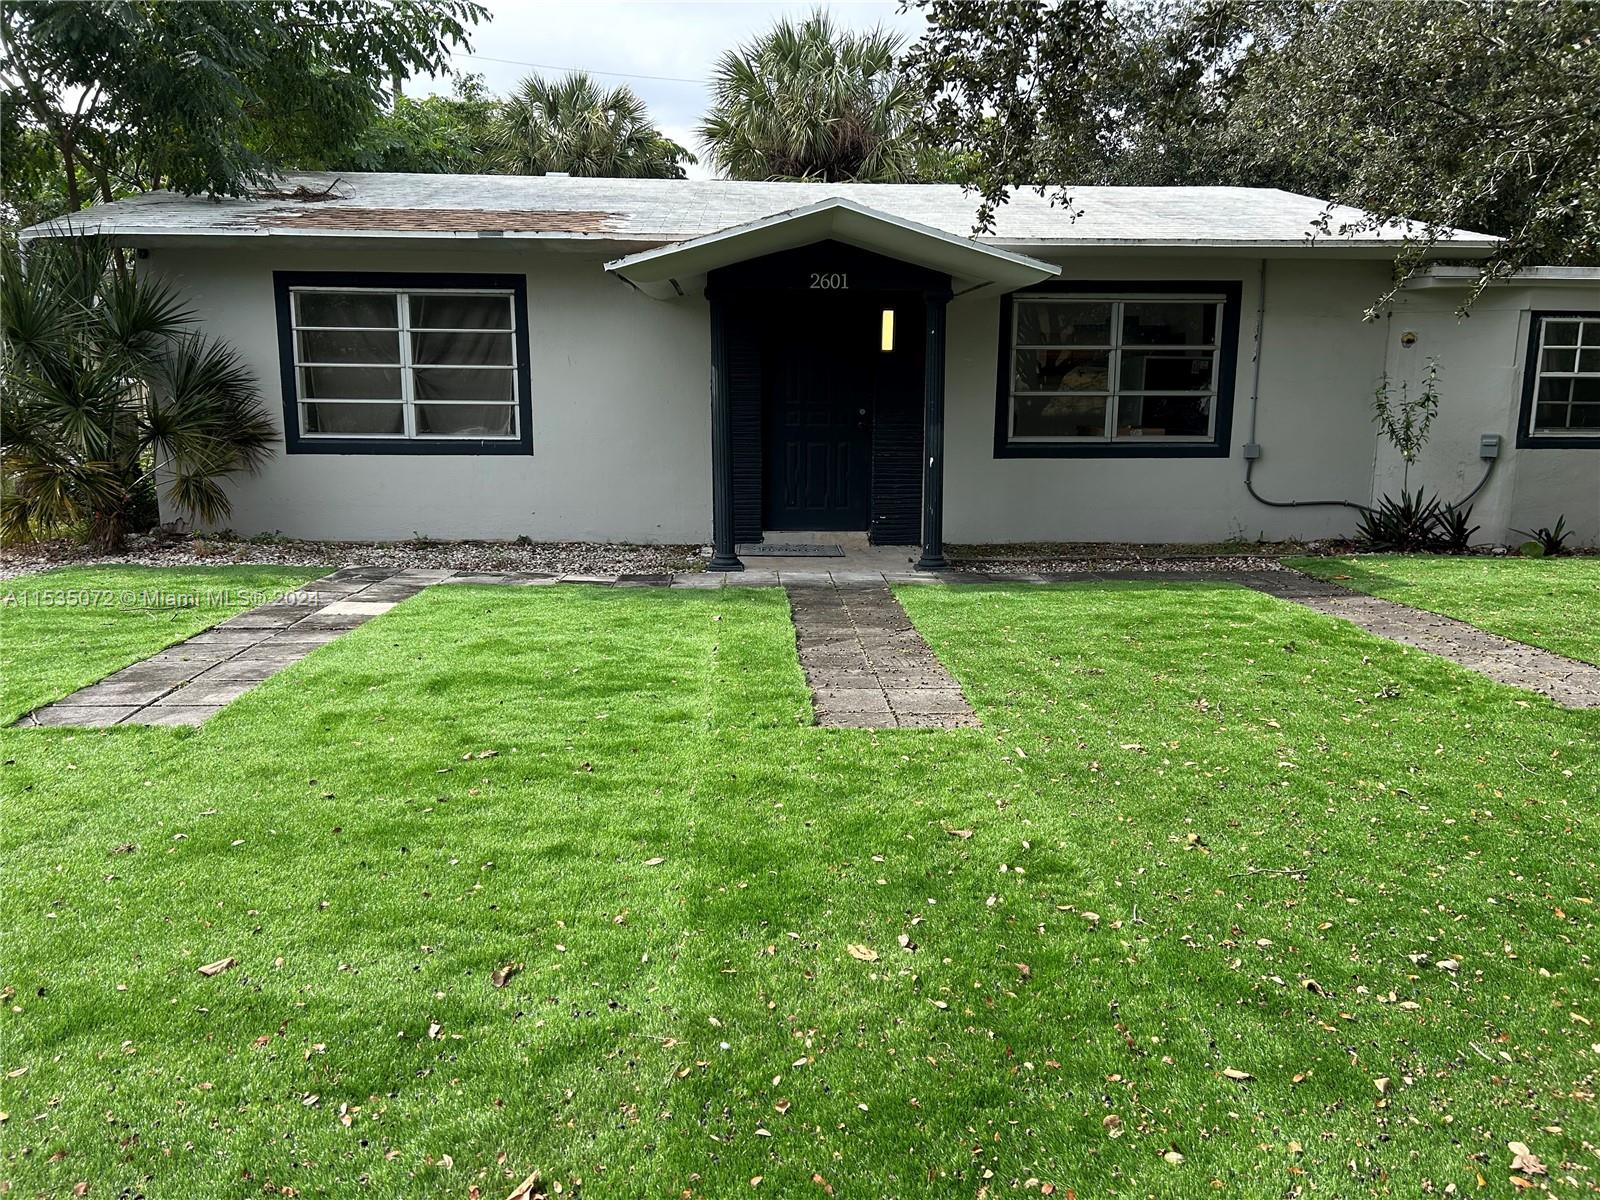 2601 Sw 13th Ave, Fort Lauderdale, Broward County, Florida - 5 Bedrooms  
2 Bathrooms - 